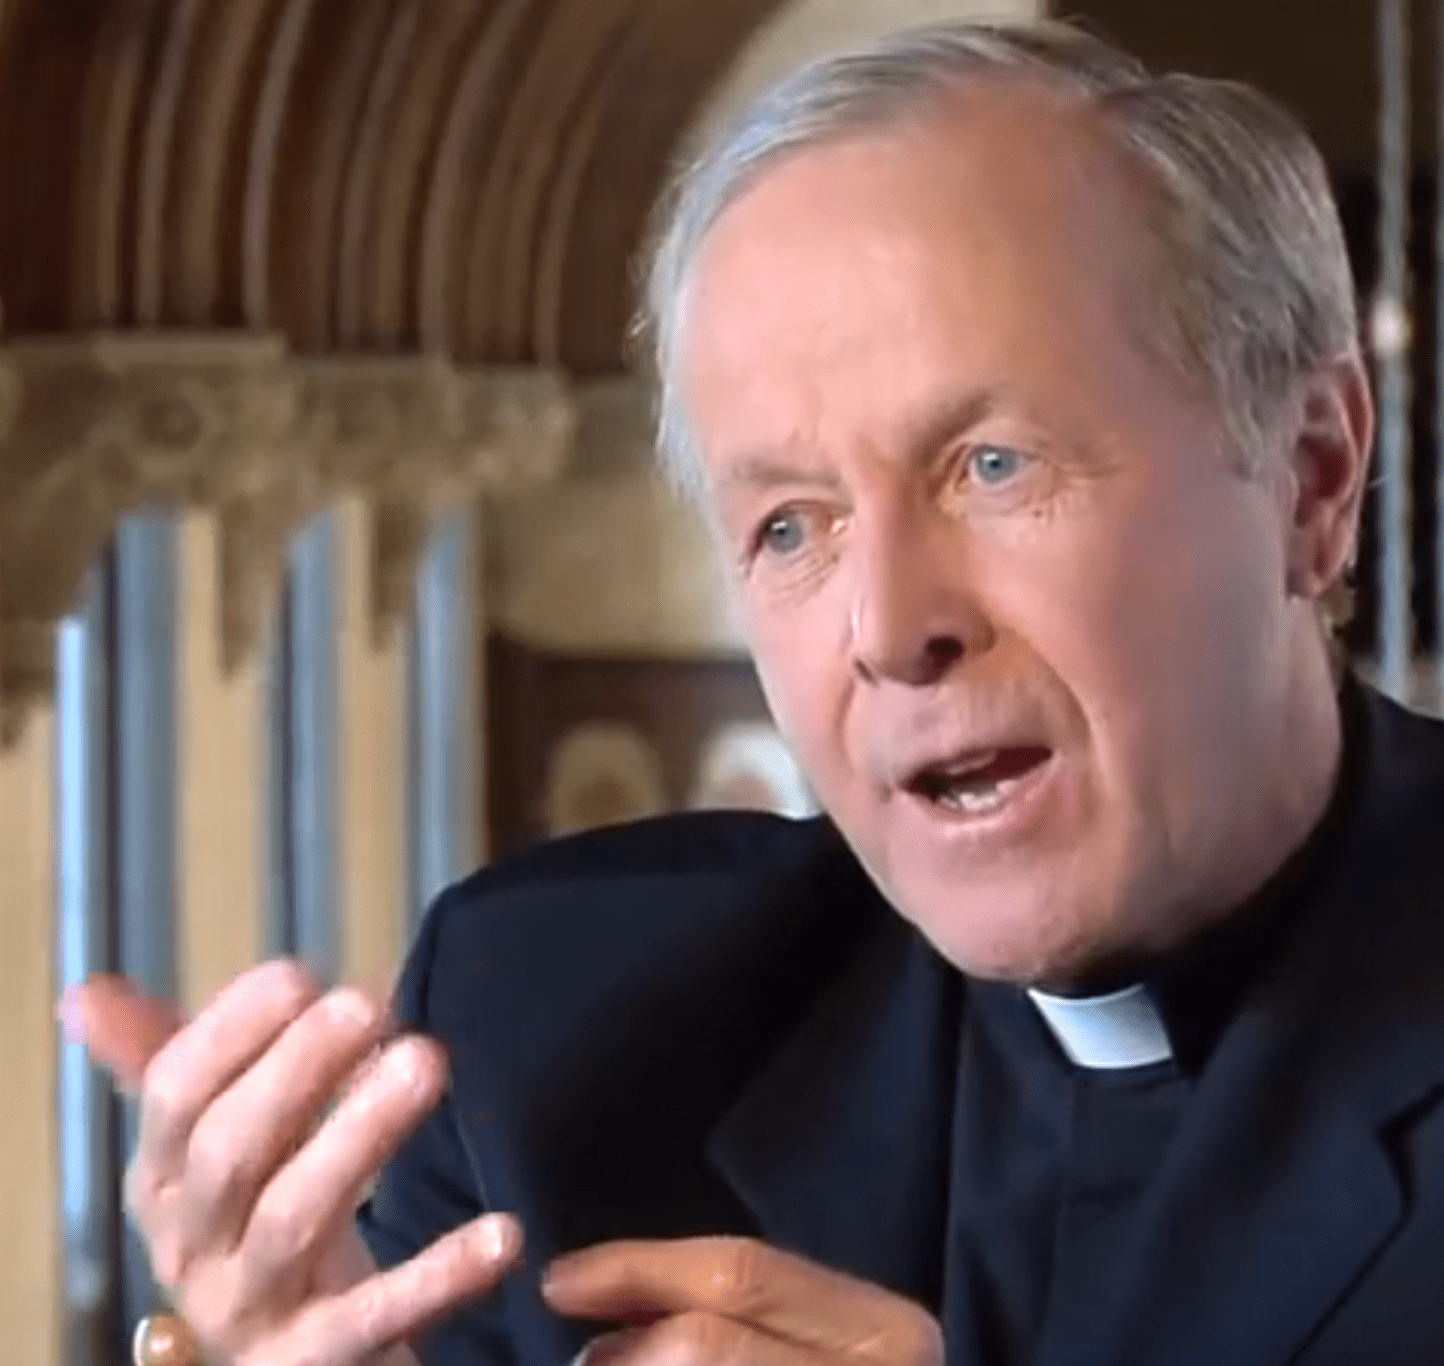 Fr. Maloney video – Systemic Change and Vincentian Holiness